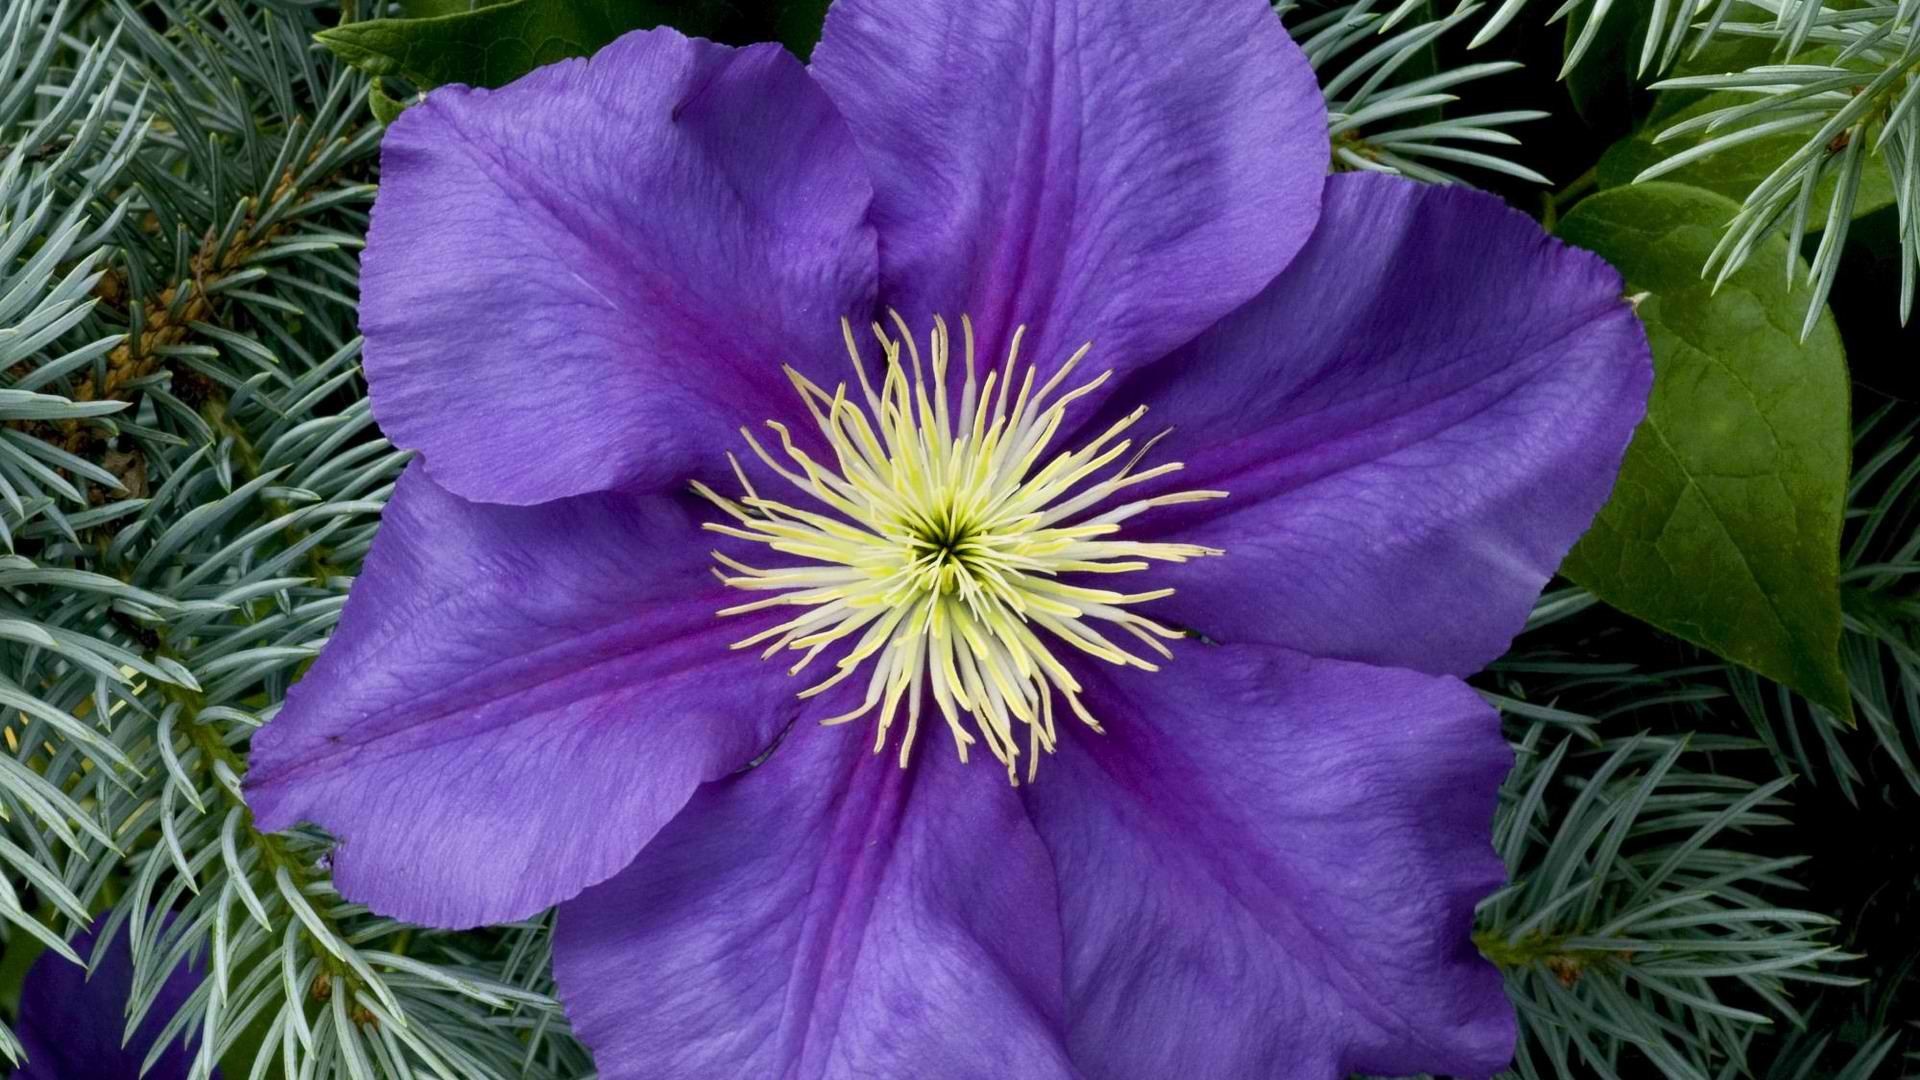 earth, clematis, close up, flower, purple flower, flowers